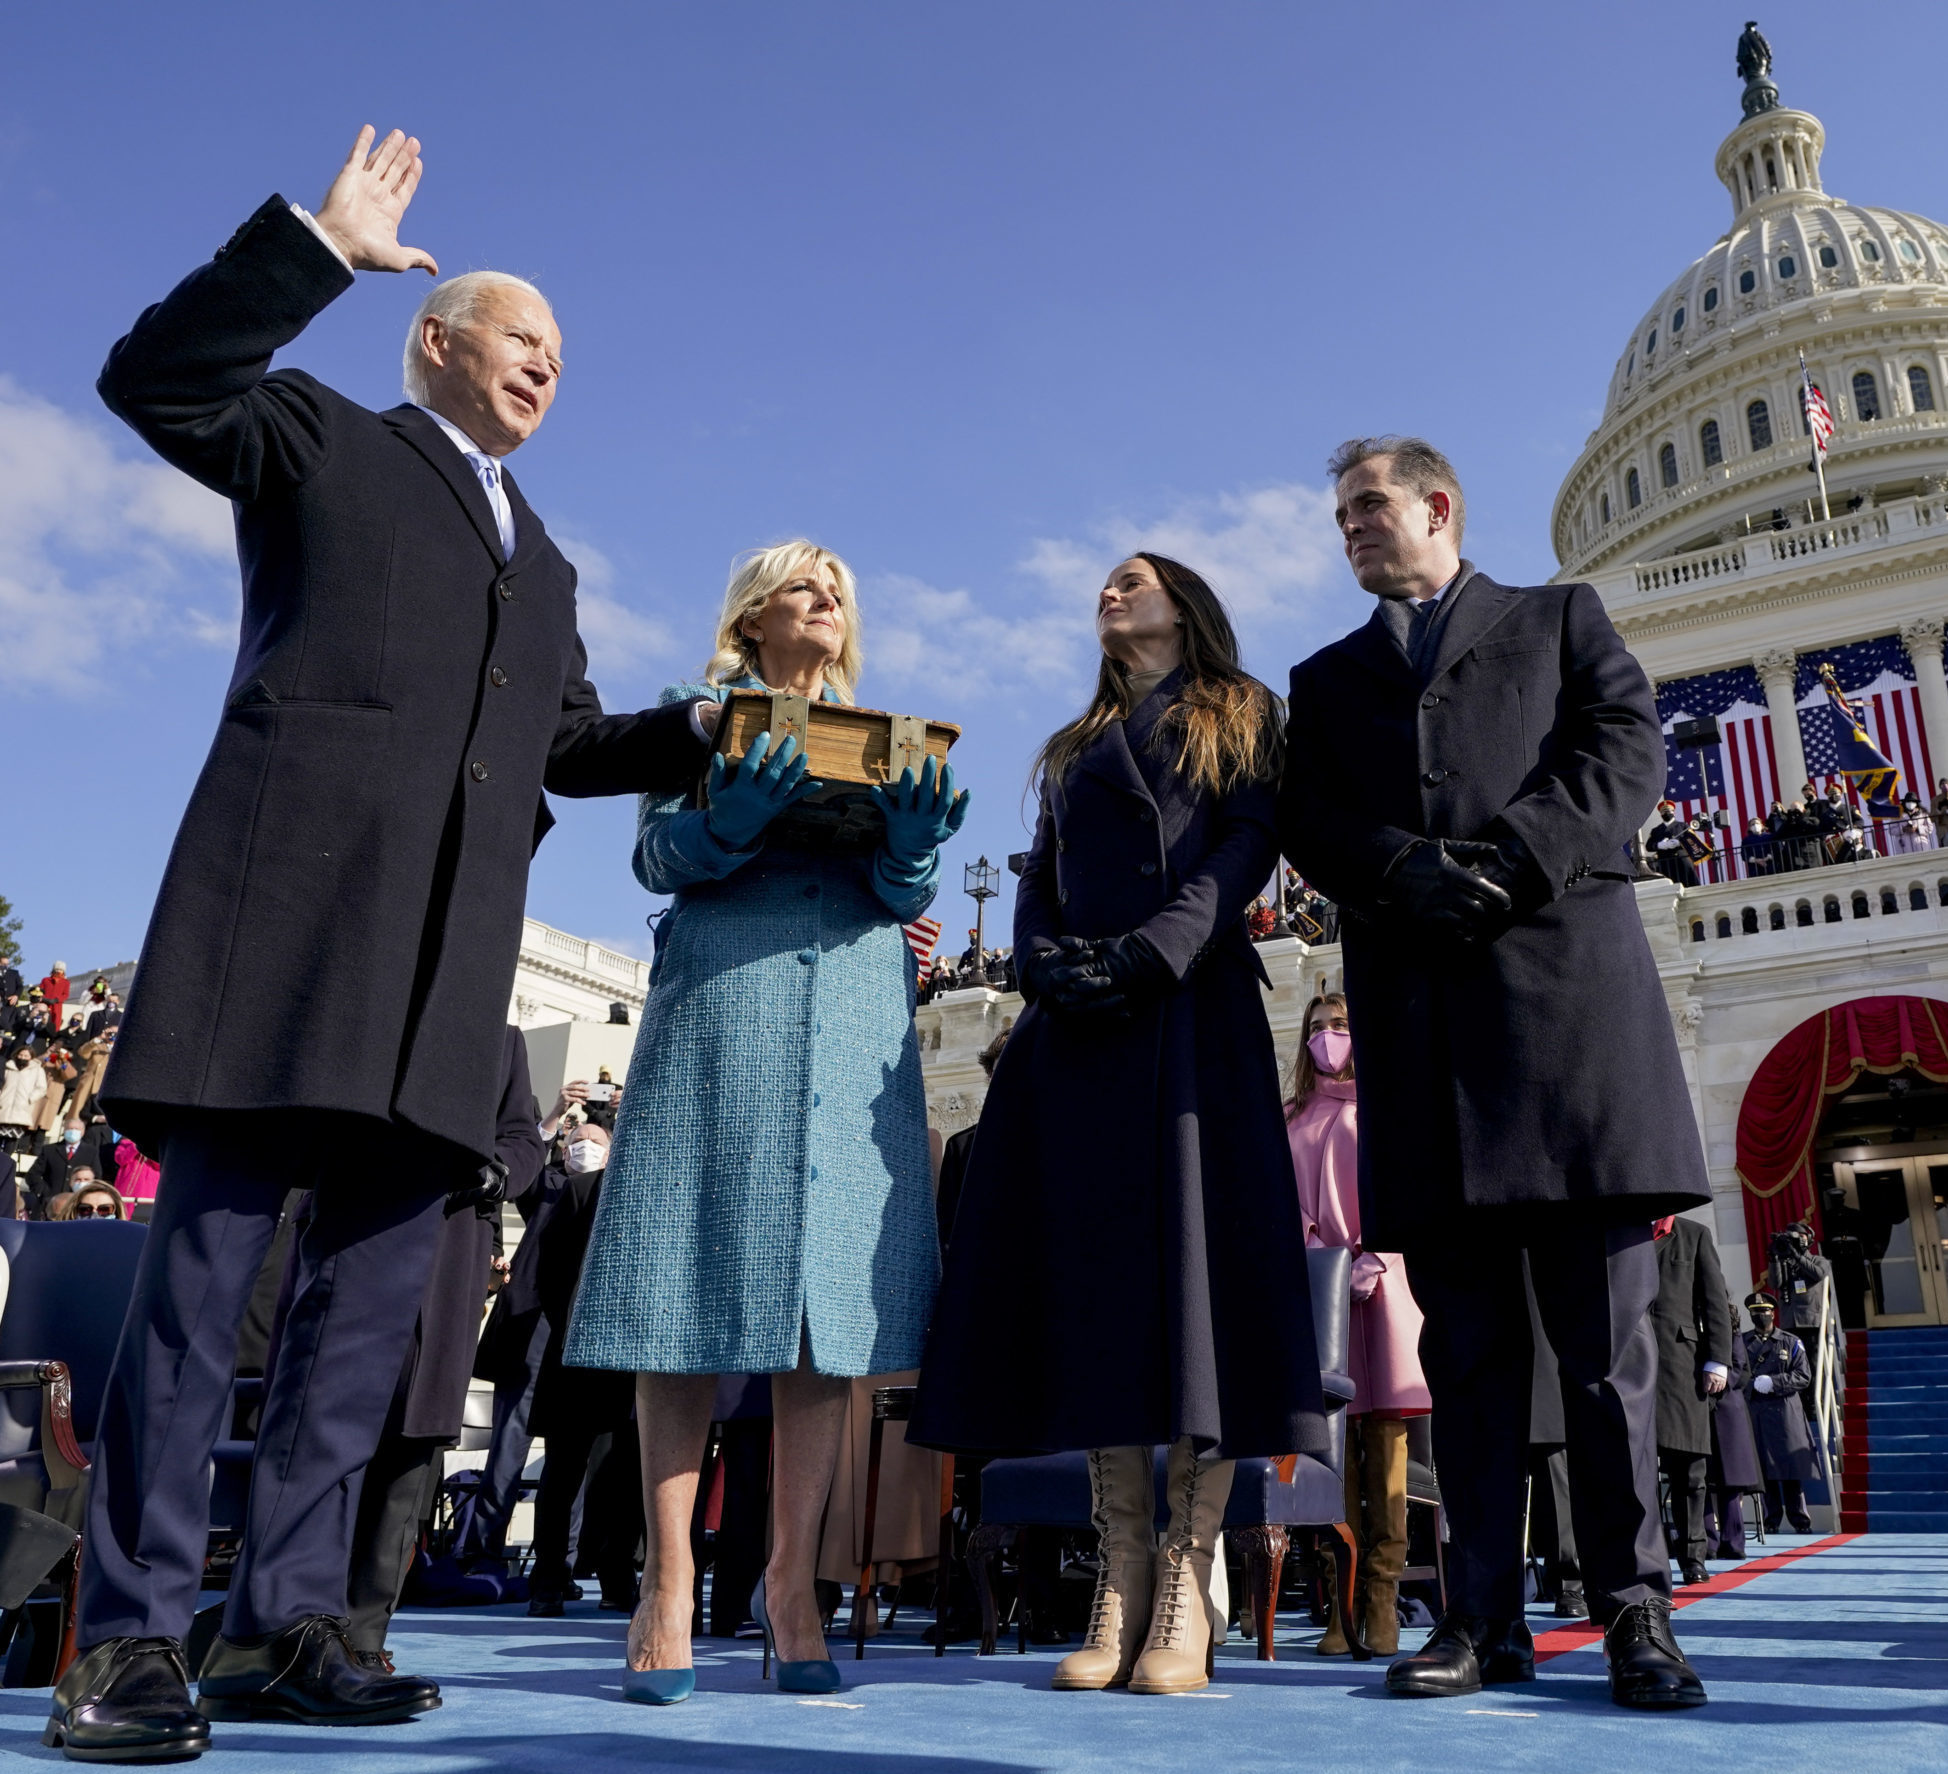 Joe Biden Sworn In As 46th President Of The United States At U.S. Capitol Inauguration Ceremony